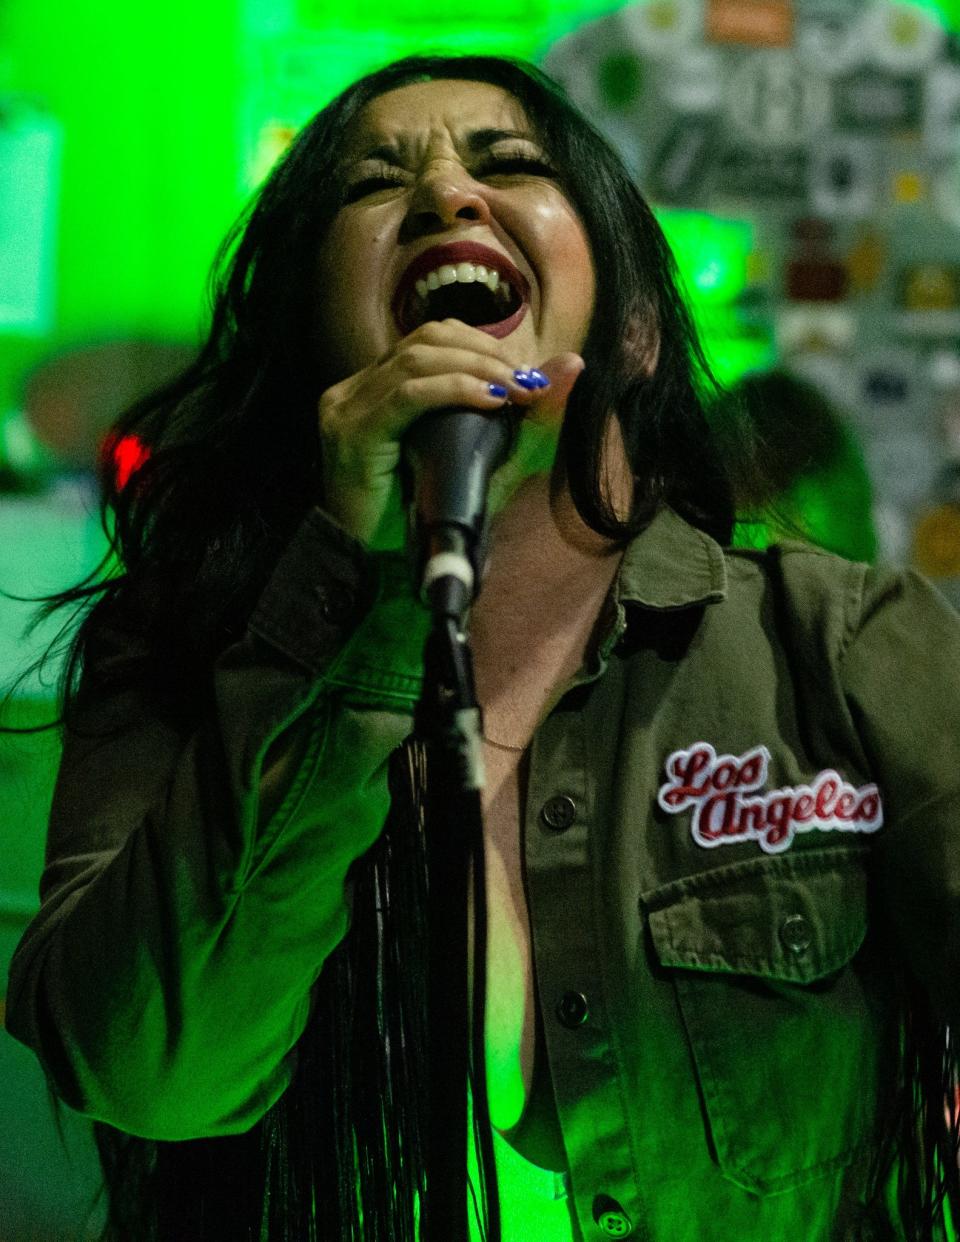 Local musician and visual artist Cakes (Monica Morones) performing a show at Coachella Valley Brewing Company in Thousand Palms, Calif., in 2022.